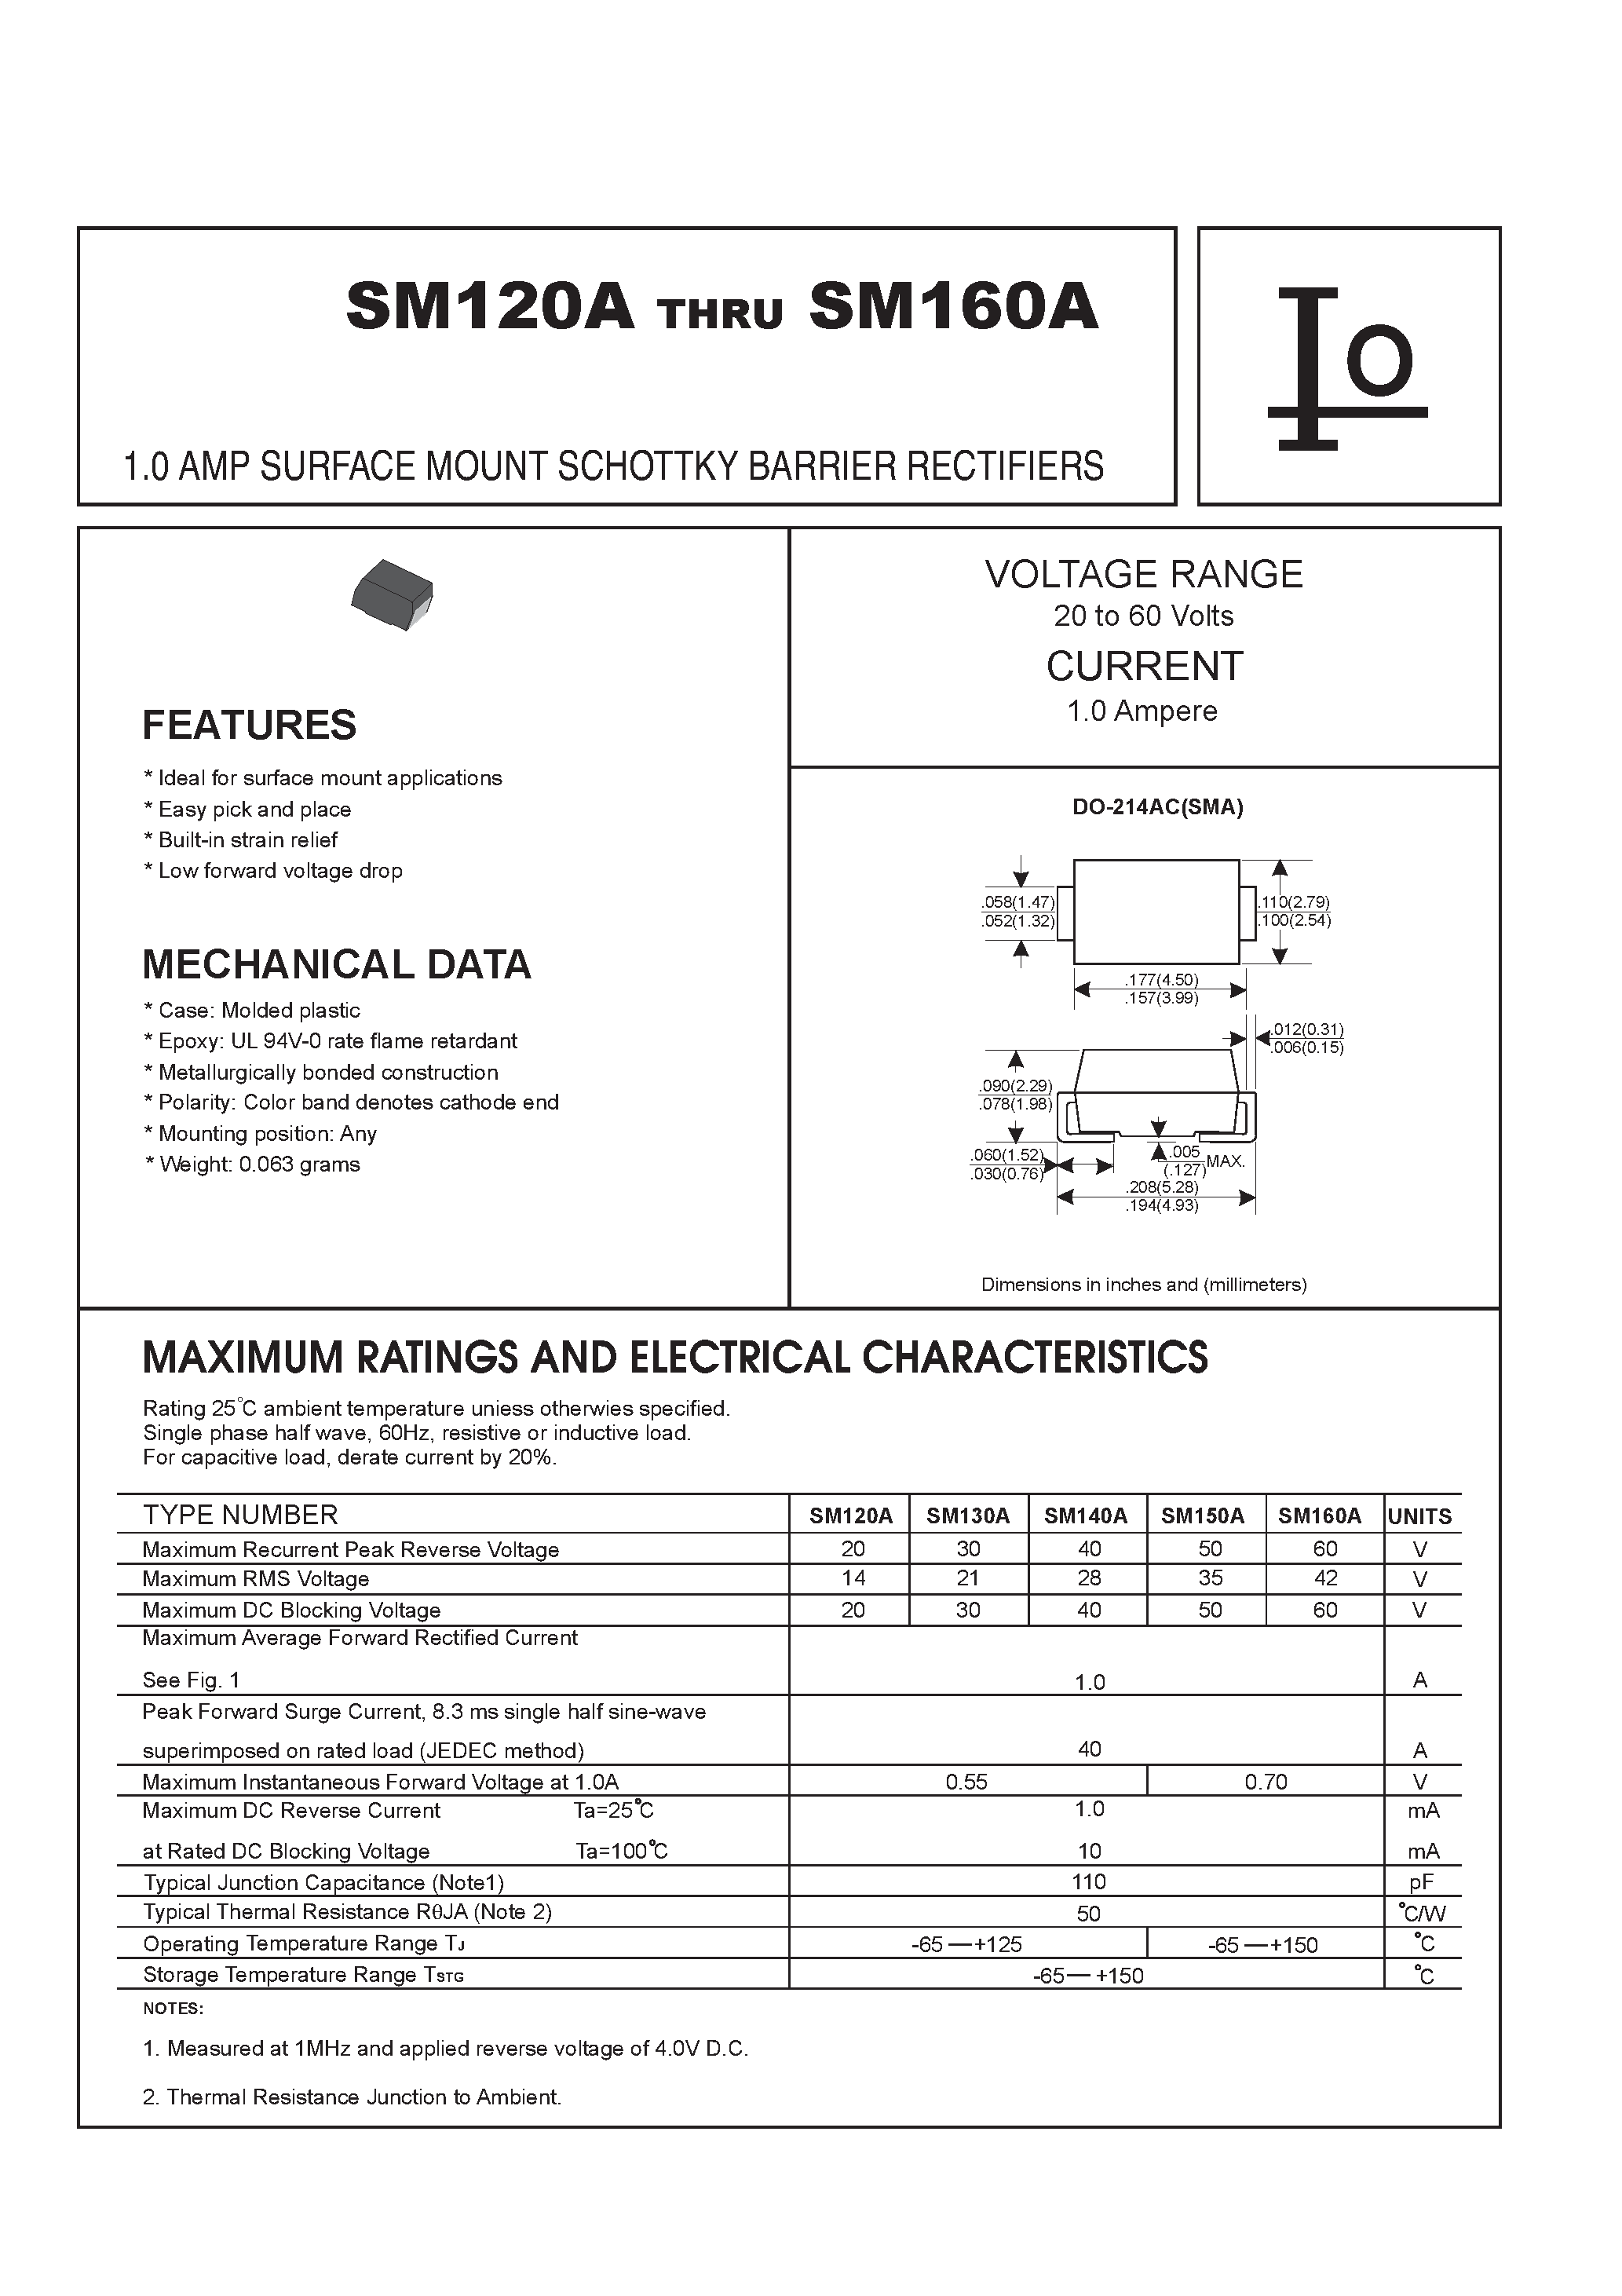 Datasheet SM120A - 1.0 AMP SURFACE MOUNT SCHOTTKY BARRIER RECTIFIERS page 1